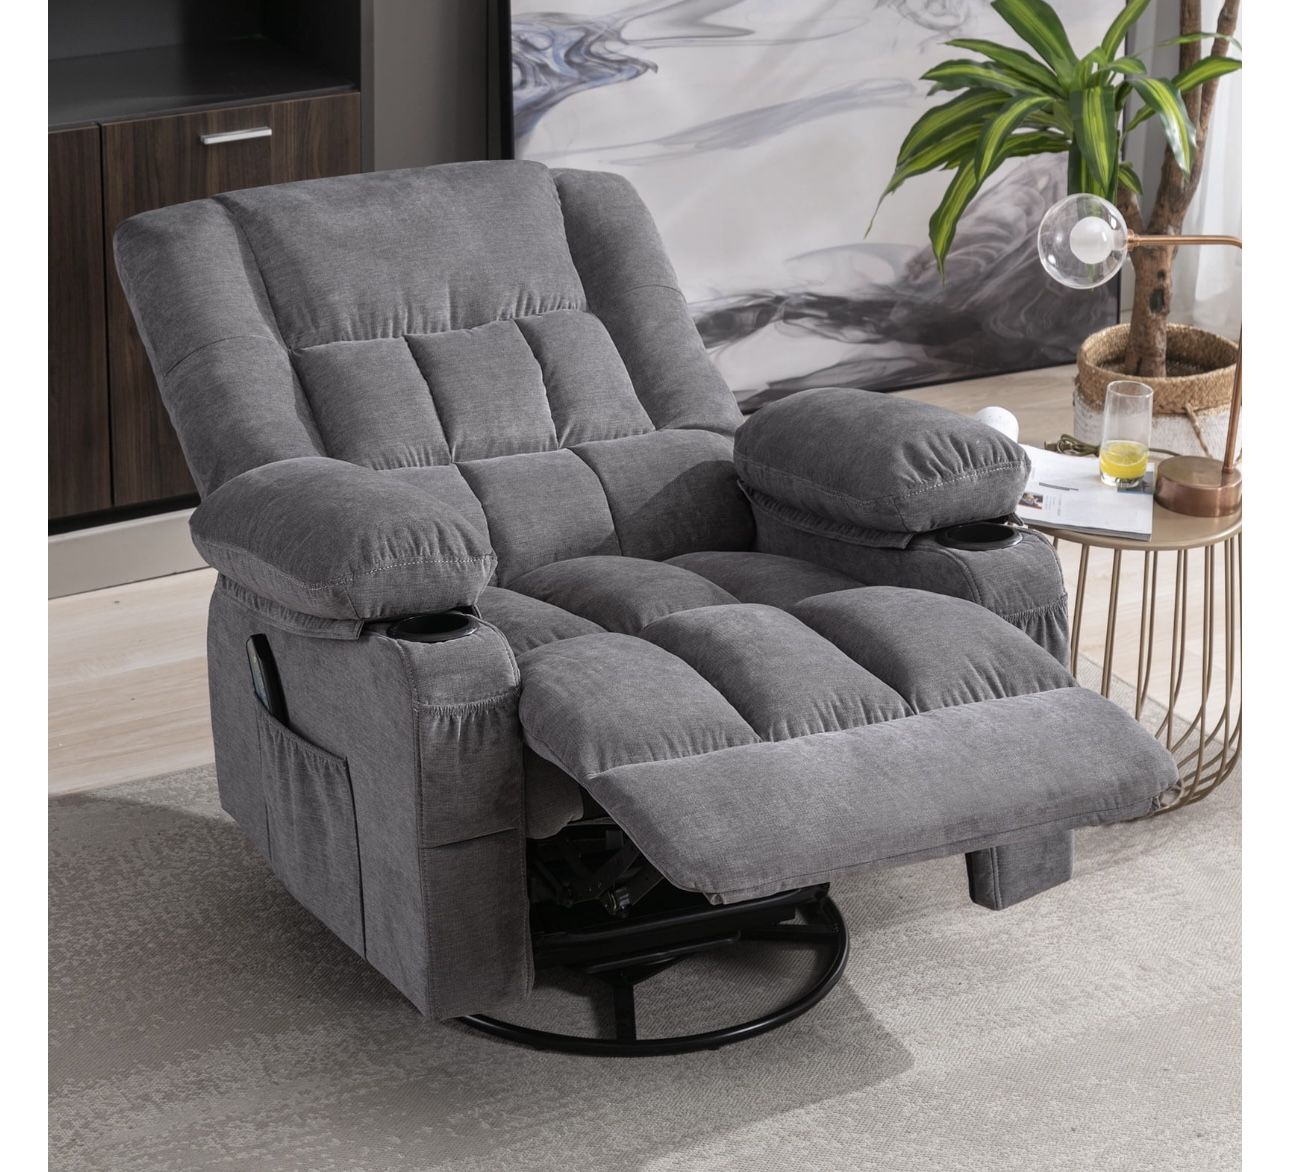 Recliner Massage Chair With Vibration 